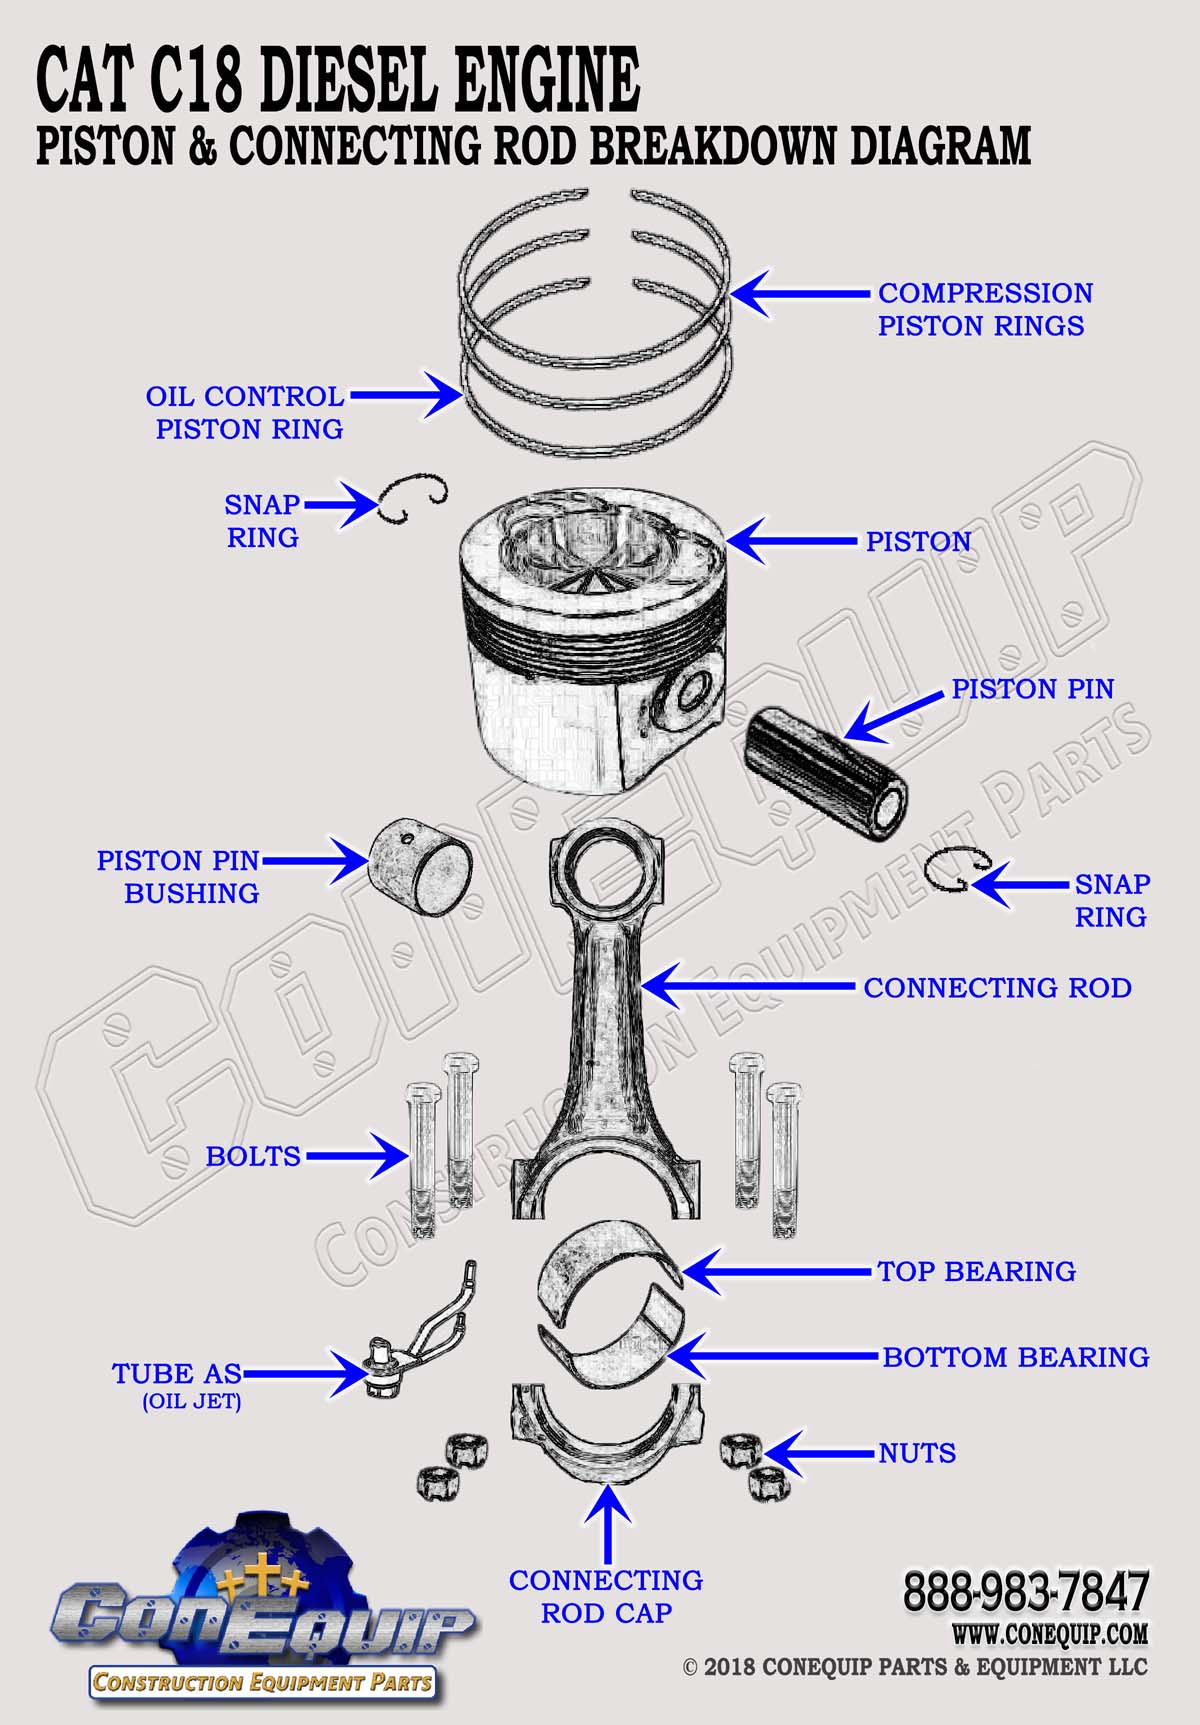 CAT C18 piston connecting rod assembly